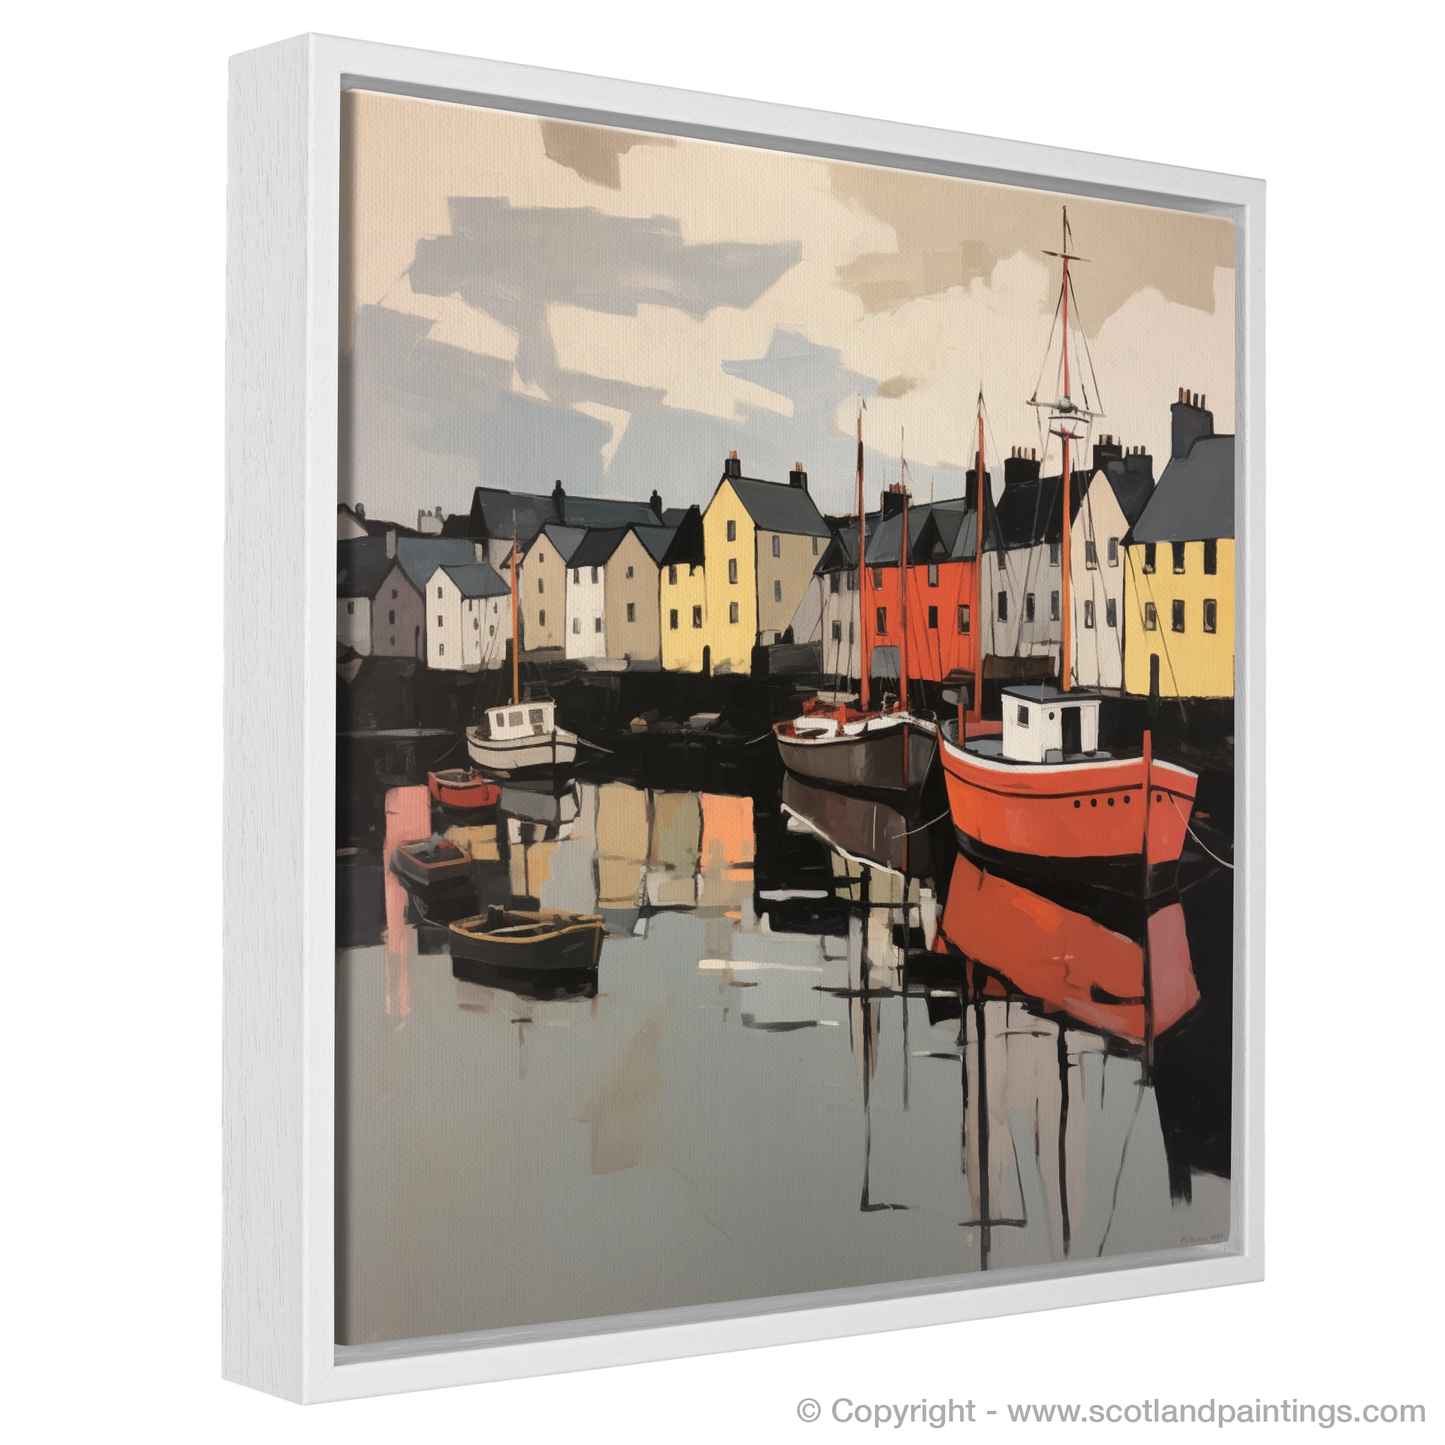 Painting and Art Print of Stornoway Harbour entitled "Expressionist Voyage to Stornoway Harbour".